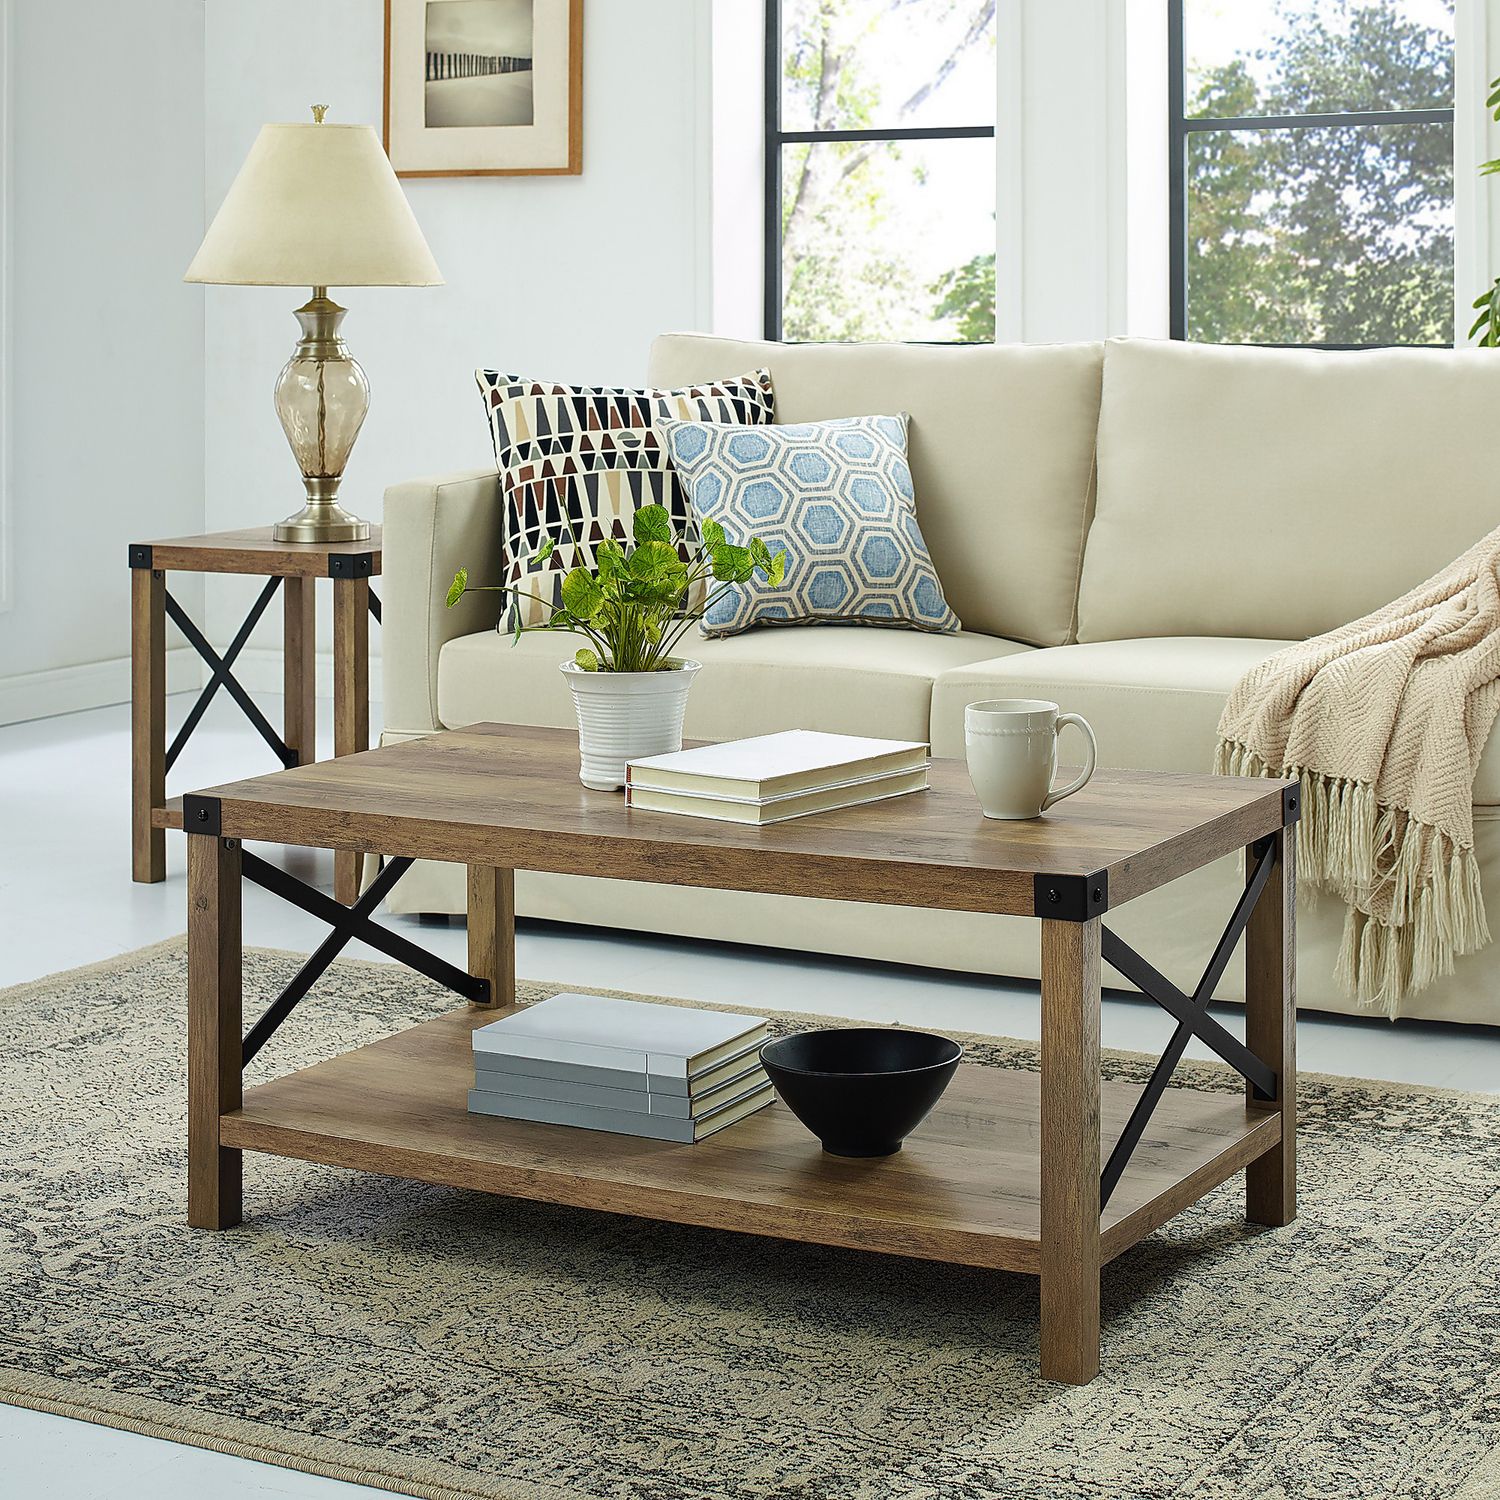 Widely Used Modern Farmhouse Coffee Table – Pier1 Intended For Modern Farmhouse Coffee Tables (View 2 of 15)